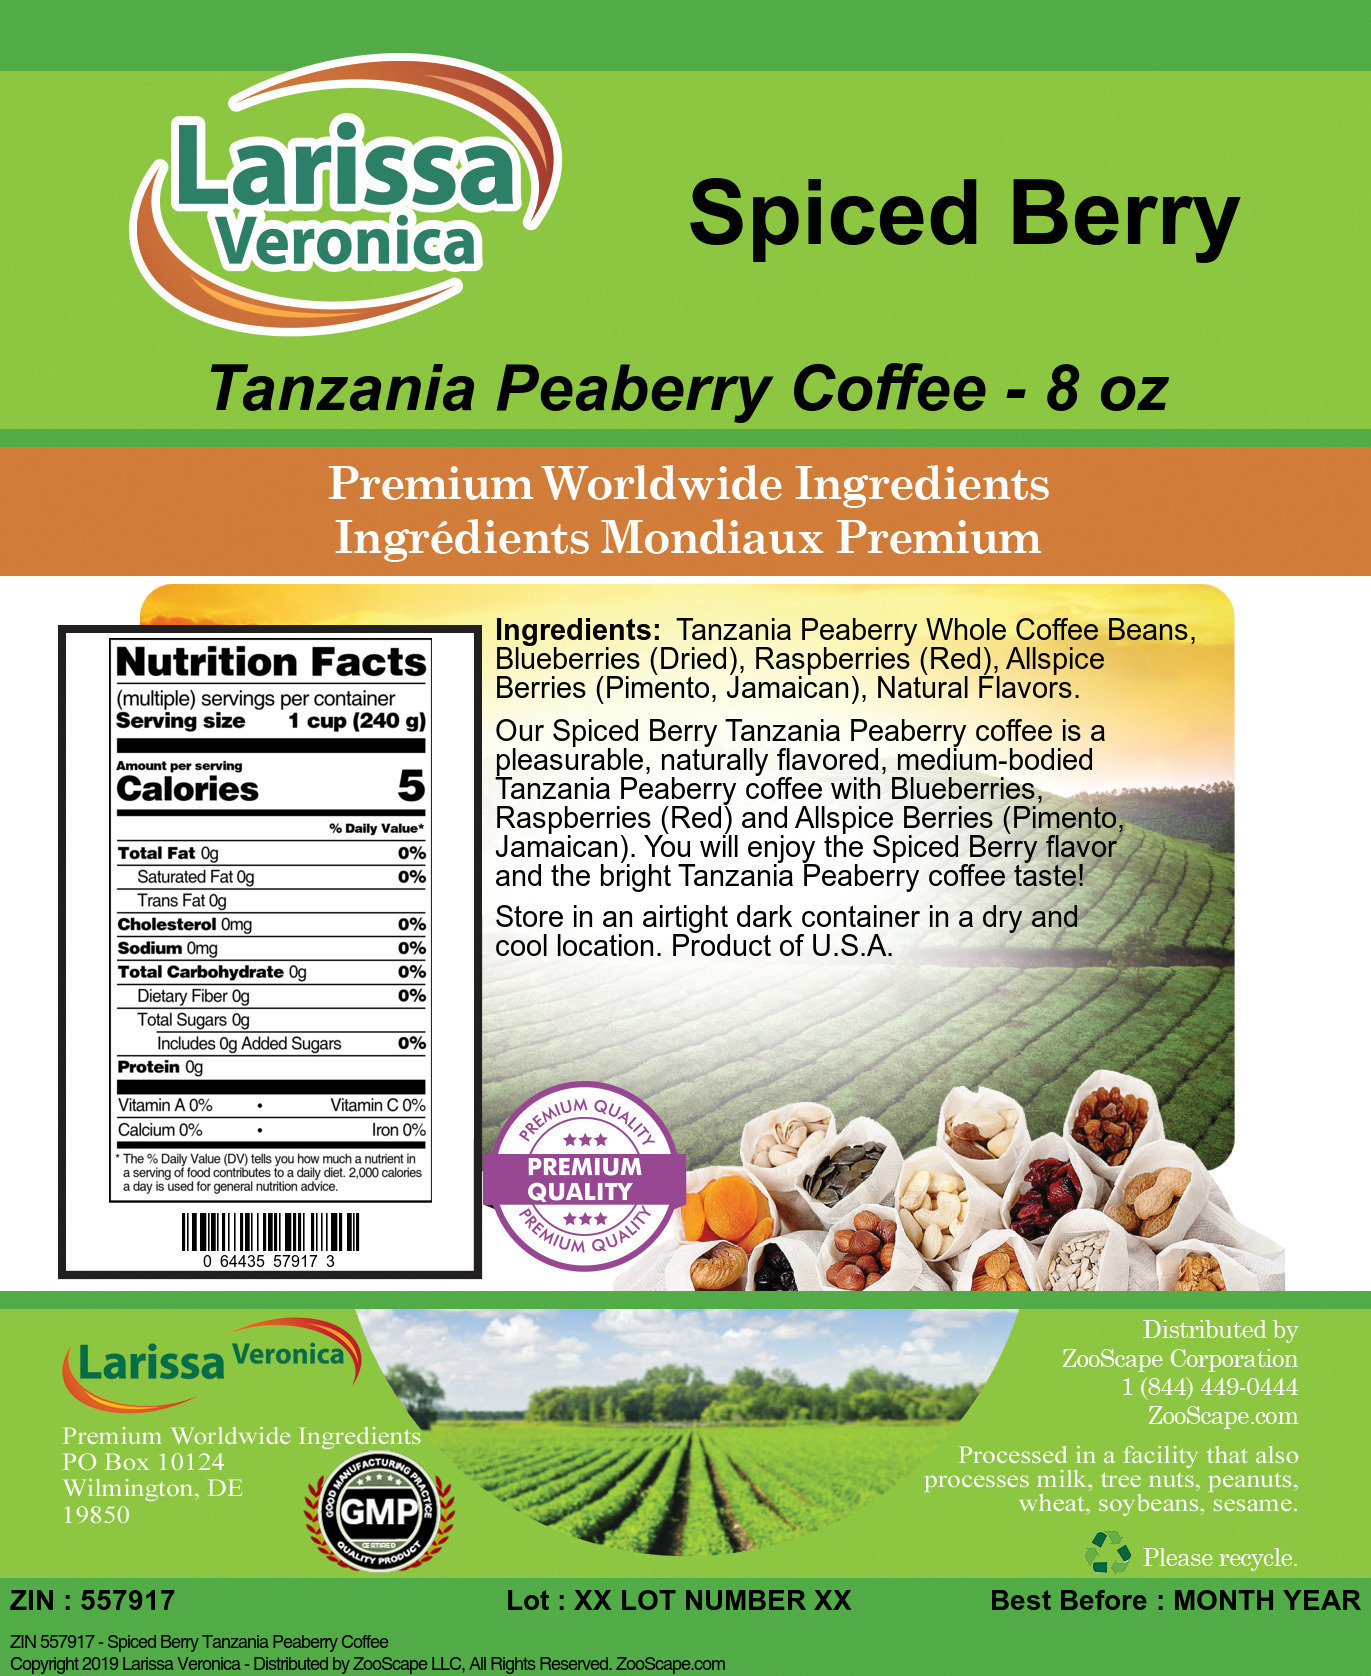 Spiced Berry Tanzania Peaberry Coffee - Label